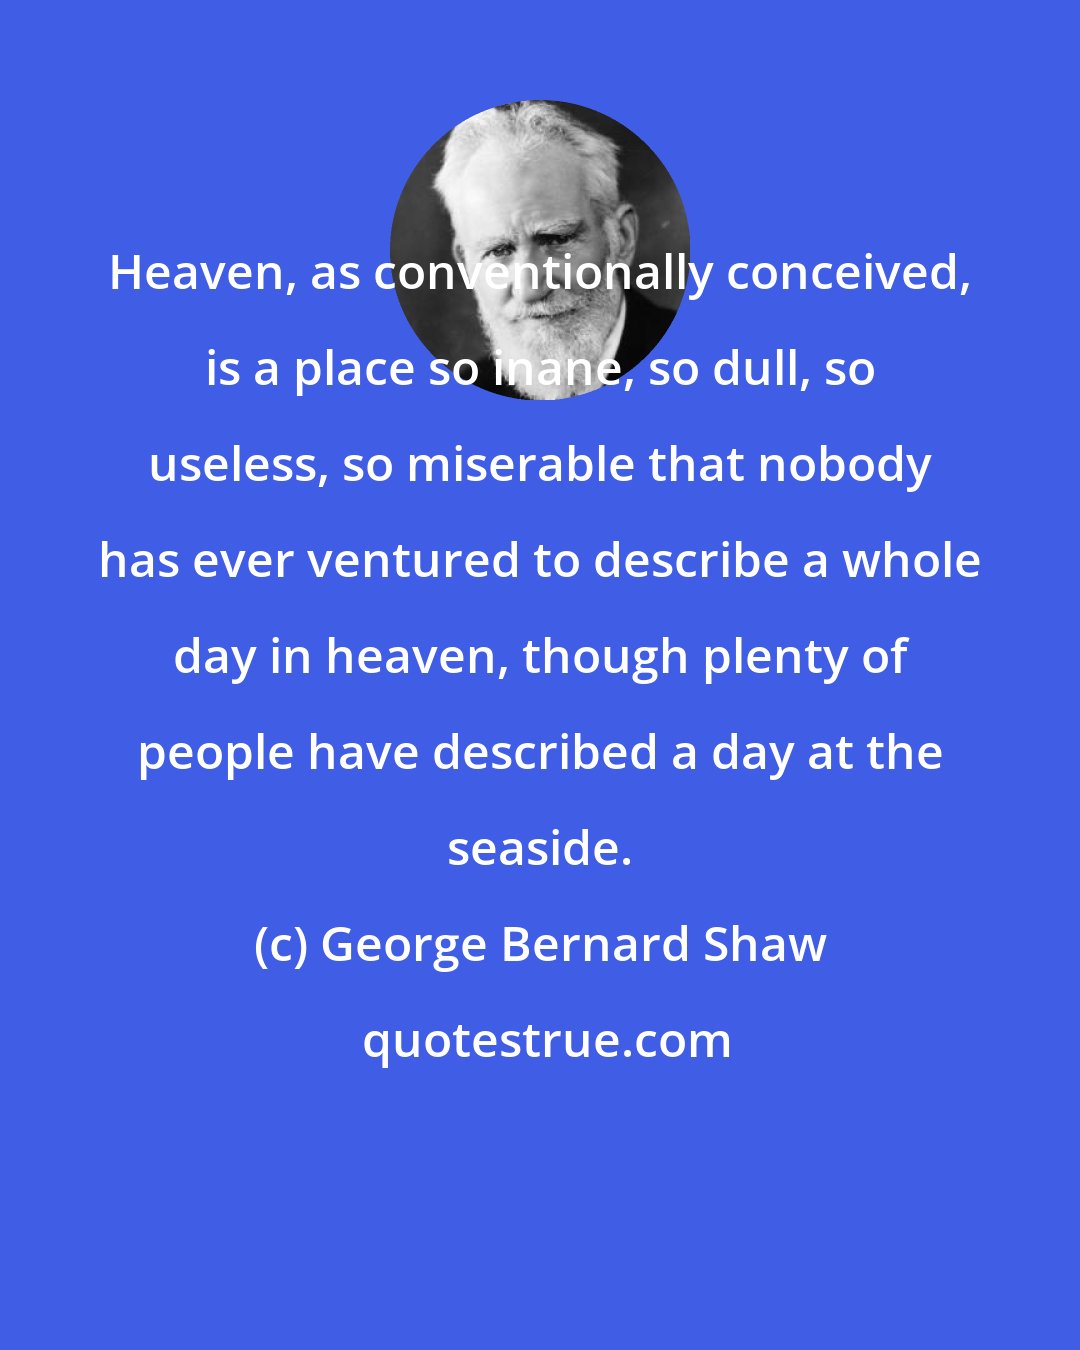 George Bernard Shaw: Heaven, as conventionally conceived, is a place so inane, so dull, so useless, so miserable that nobody has ever ventured to describe a whole day in heaven, though plenty of people have described a day at the seaside.